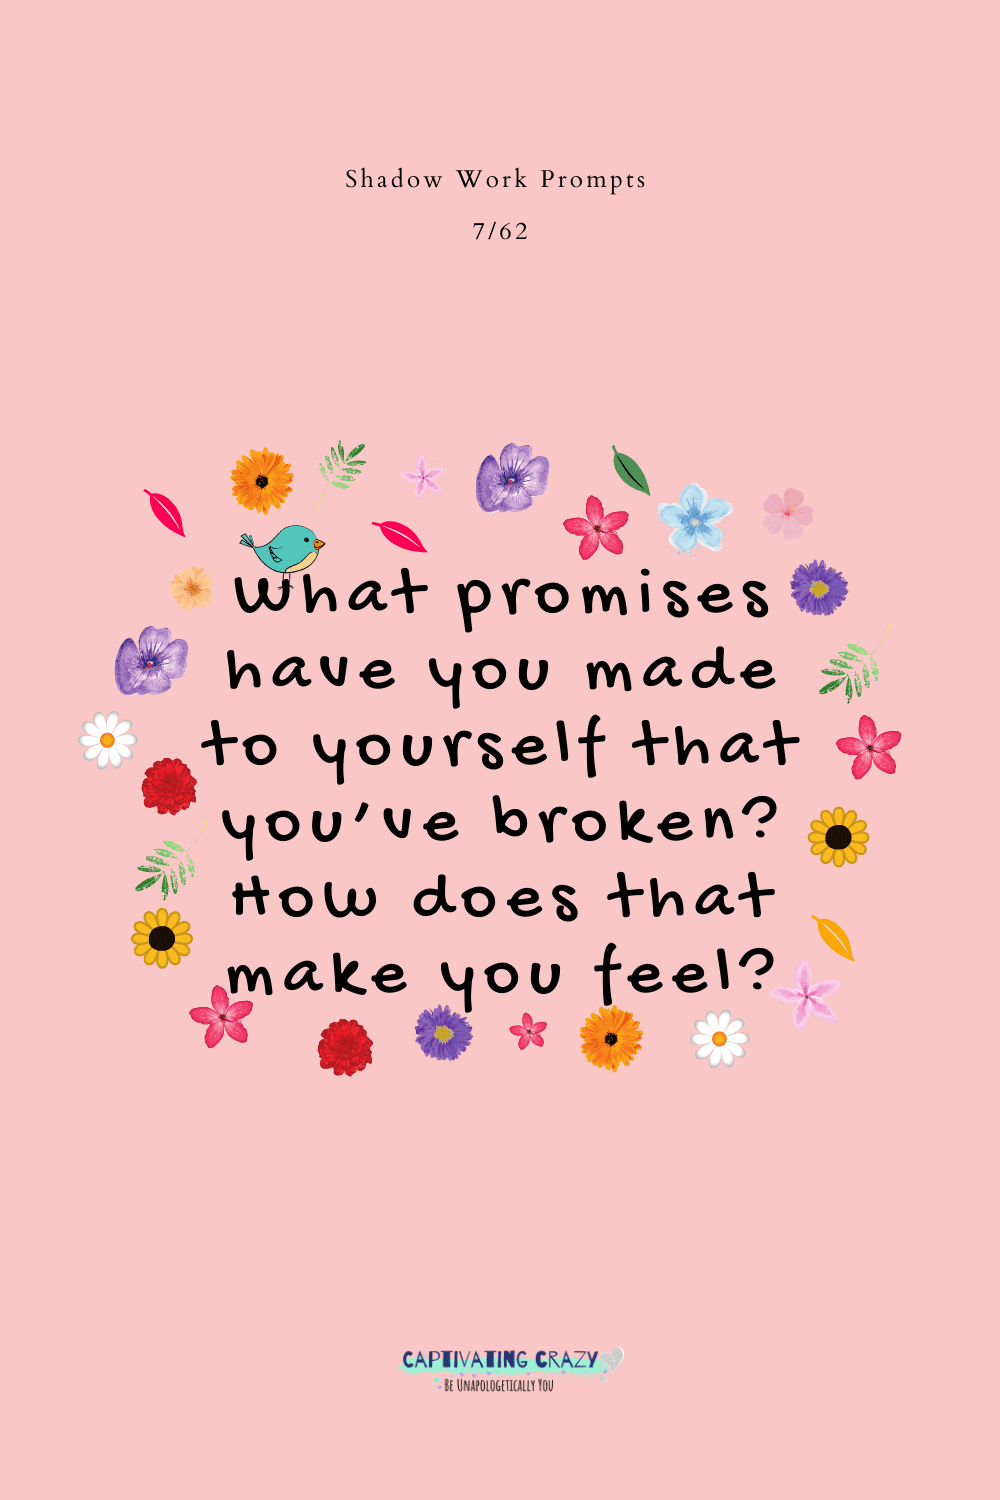 What promises have you made to yourself that you've broken? How does that make you feel?